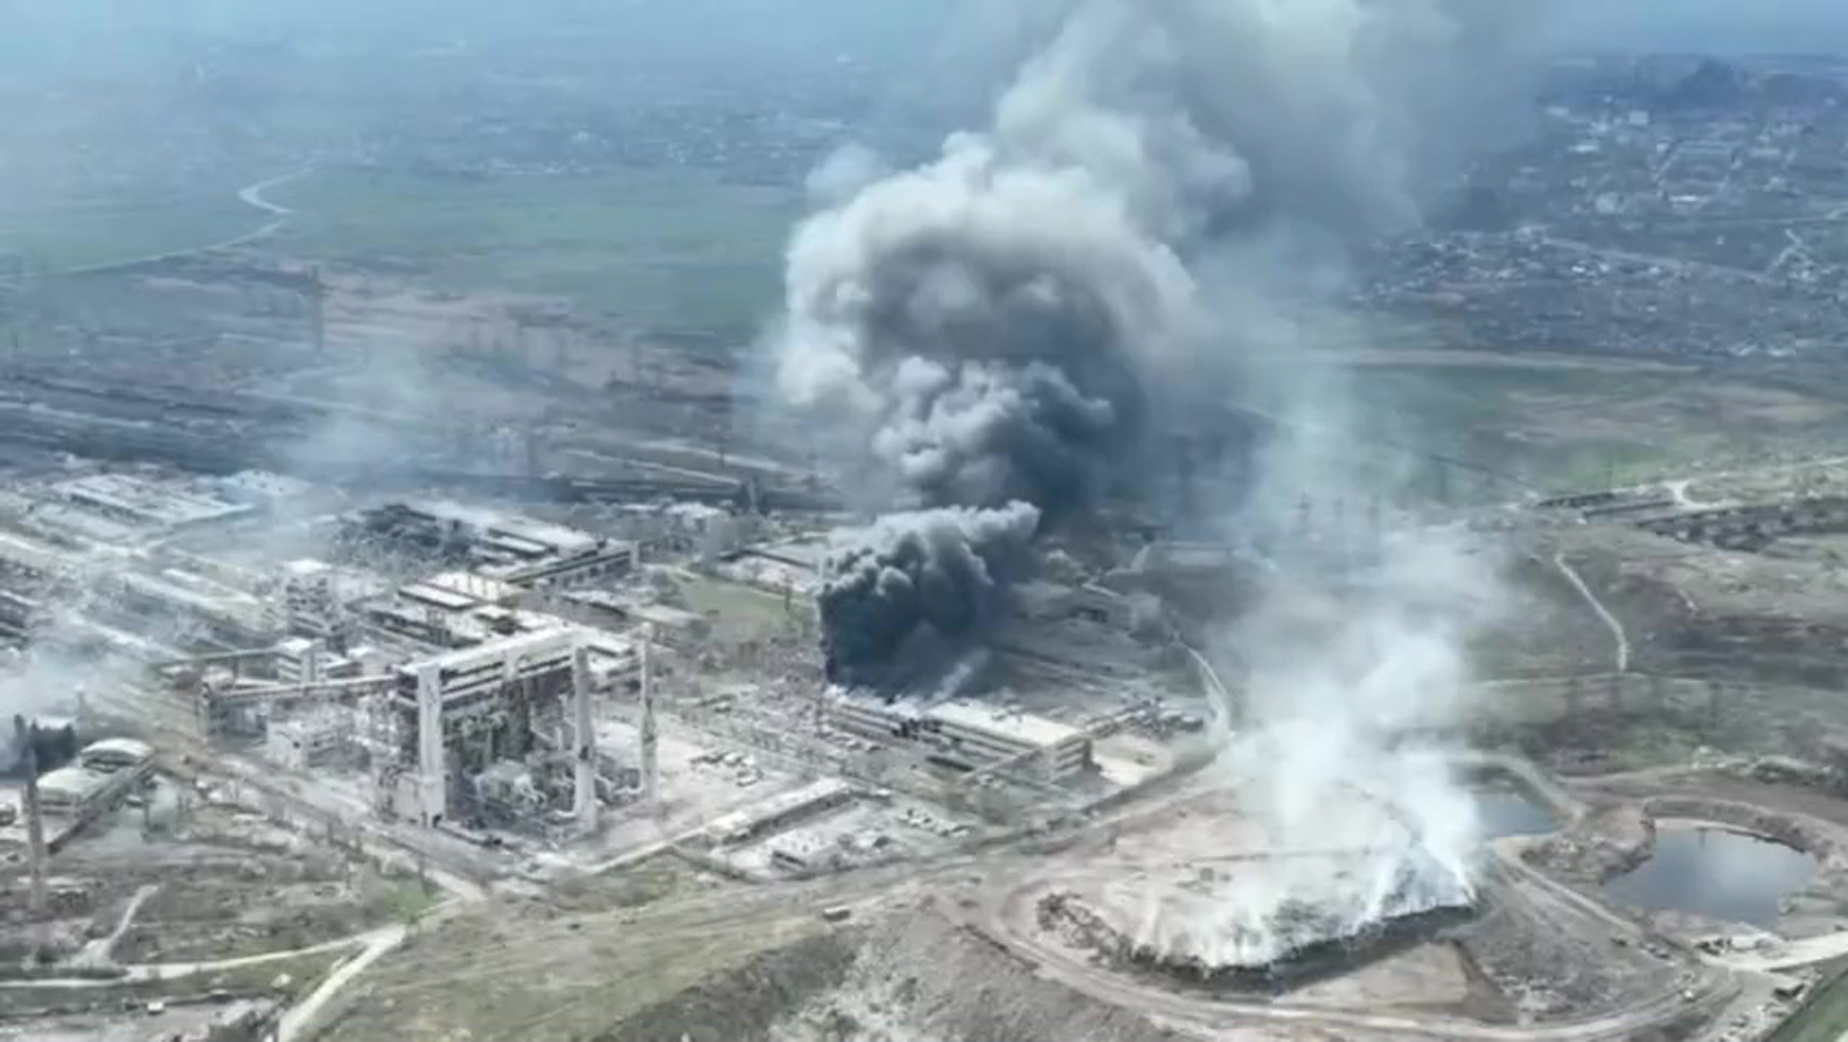 epa09896967 A frame grab from an undated handout drone video first published by DPR militia commander Alexander Khodakovsky and made available by the Mariupol City Council shows smoke rising from the Azovstal steel plant during airstrikes in Mariupol, eastern Ukraine, 18 April (issued 19 April 2022). The Russian Defence Ministry on 19 April 2022 issued a statement calling on the Ukrainian forces in Mariupol "to cease any hostilities and lay down their arms. All who lay down their weapons are guaranteed the preservation of life." The city council on 18 April 2022 via their official Telegram channel said that at least 1,000 civilians are sheltering in the underground shelters of the metallurgical plant, and that heavy bombs were dropped on the Azovstal plant by Russian forces.  EPA/MARIUPOL CITY COUNCIL HANDOUT  HANDOUT EDITORIAL USE ONLY/NO SALES